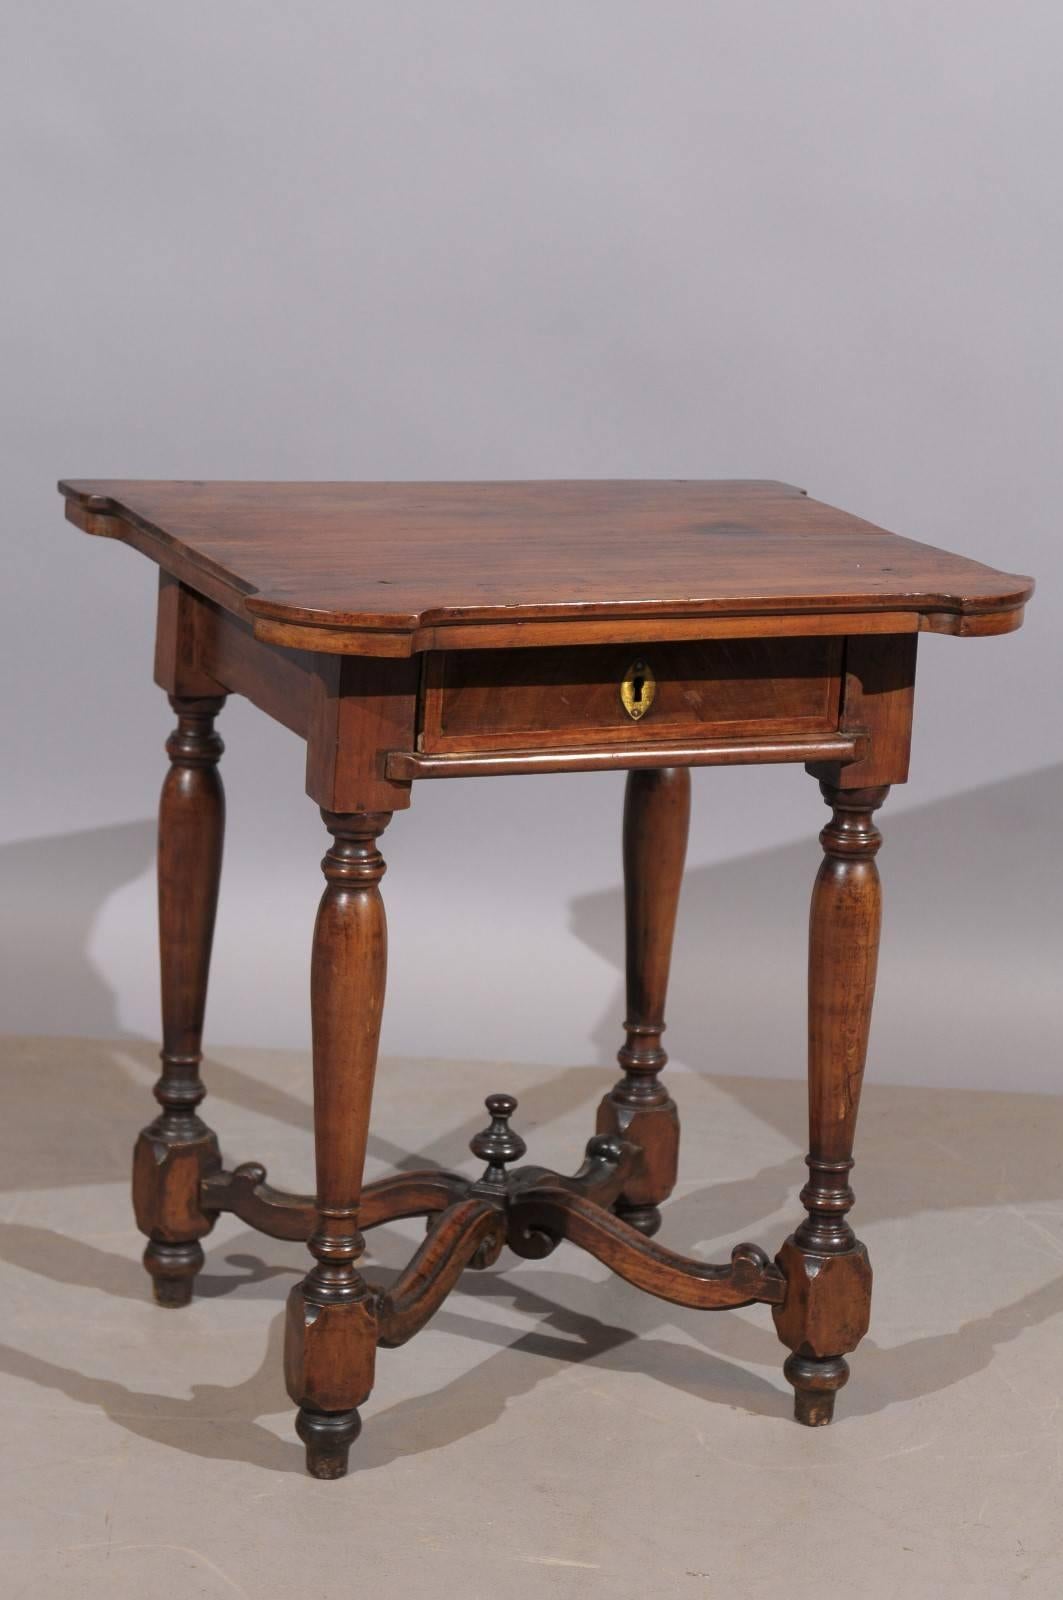 Petite 18th century Louis XIV style walnut side table with X-stretcher and drawer.